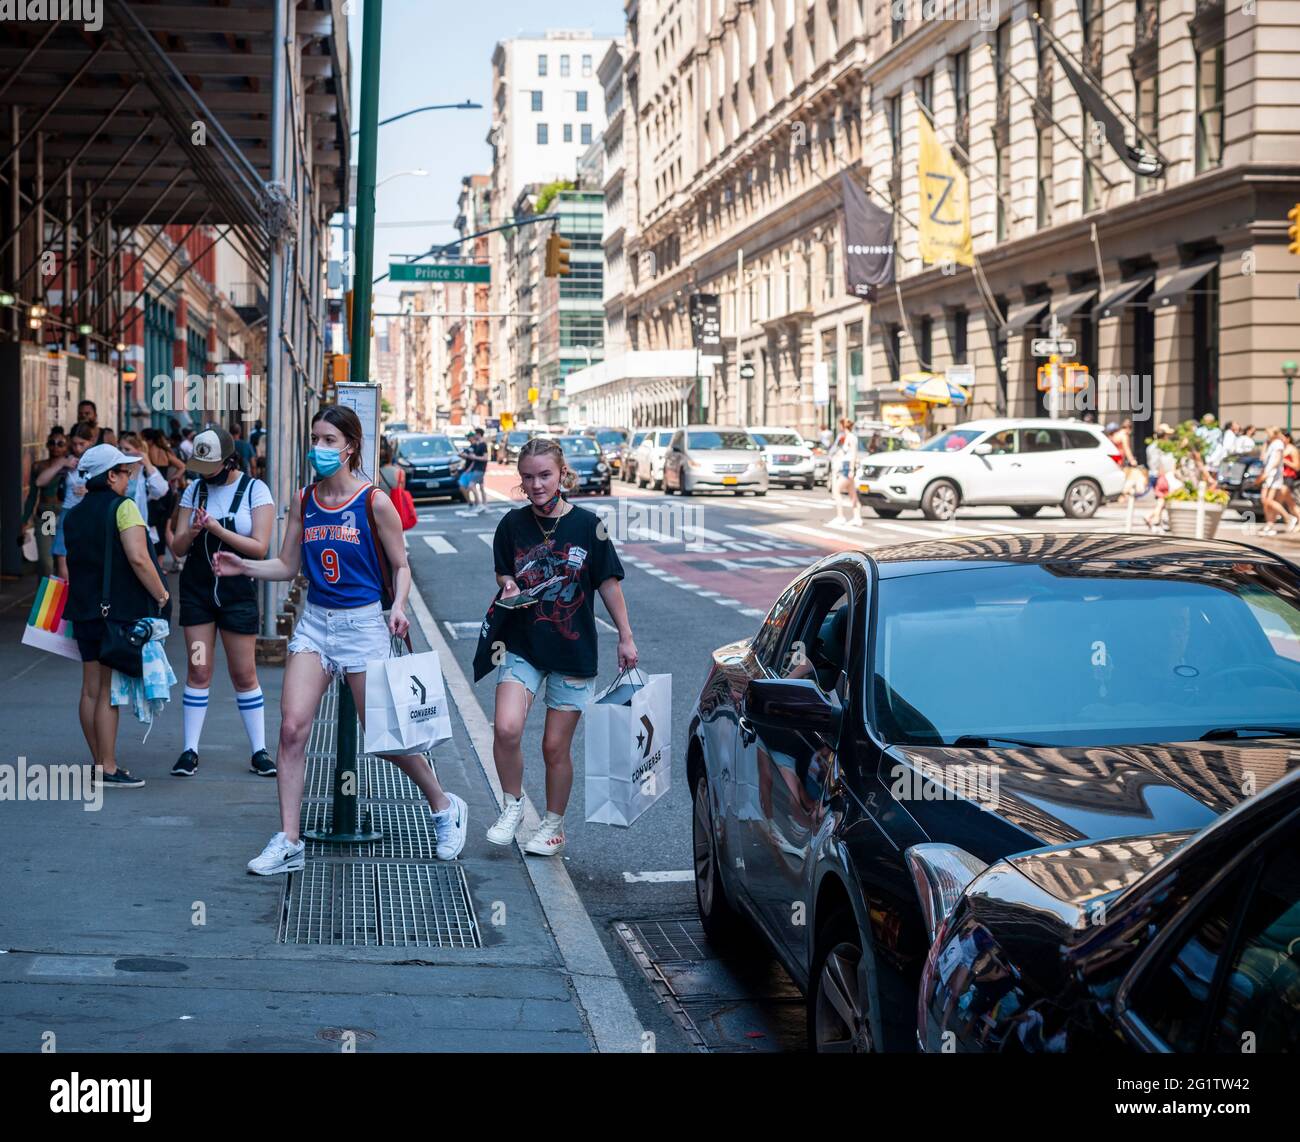 New York, USA. 06th June, 2021. Shoppers in the Soho neighborhood in New York on Sunday, June 6, 2021. New York has relaxed mask mandates allowing most outdoor activities to be mask free as well as many indoor settings, with caveats. (Photo by Richard B. Levine) Credit: Sipa USA/Alamy Live News Stock Photo